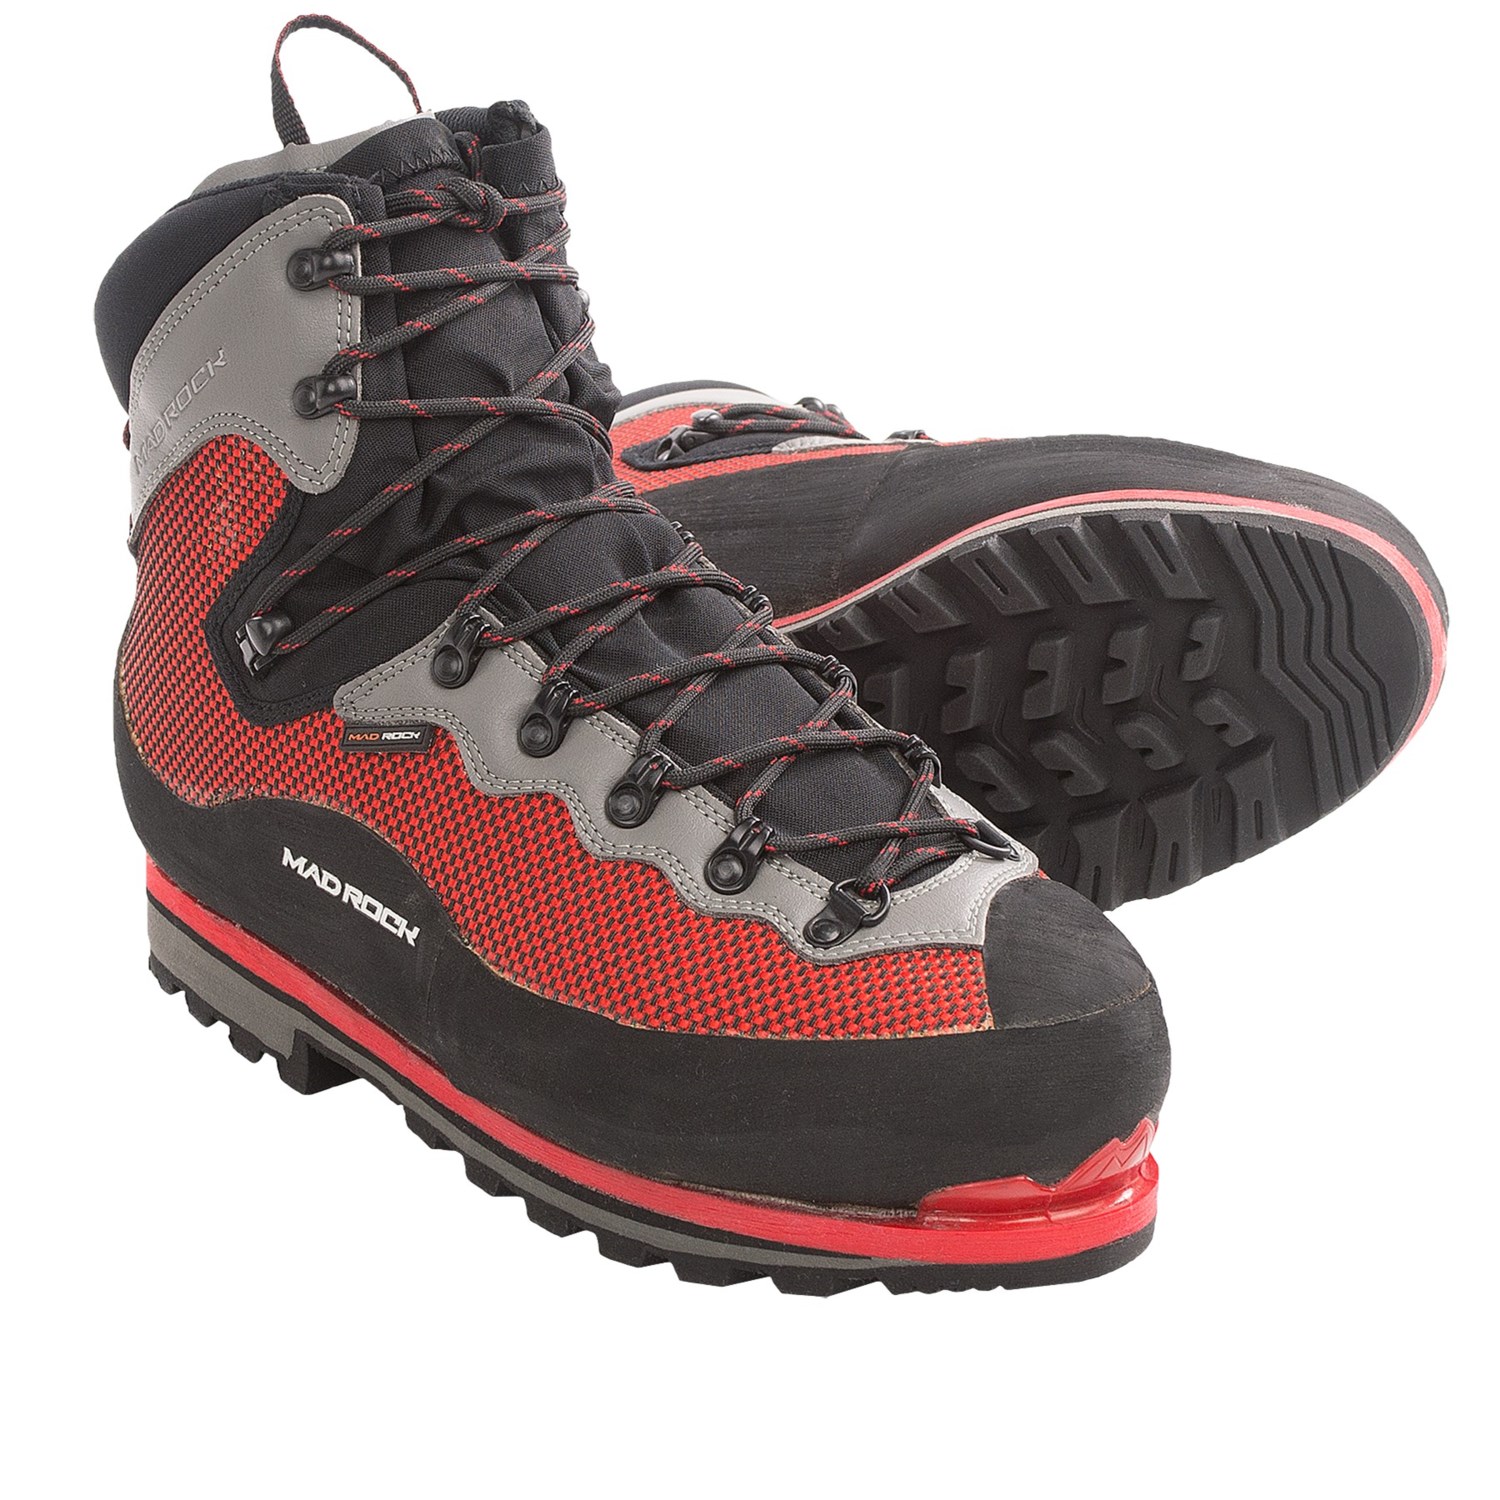 Mad Rock Alpinist Mountaineering Boots (For Men) 7299J - Save 41%